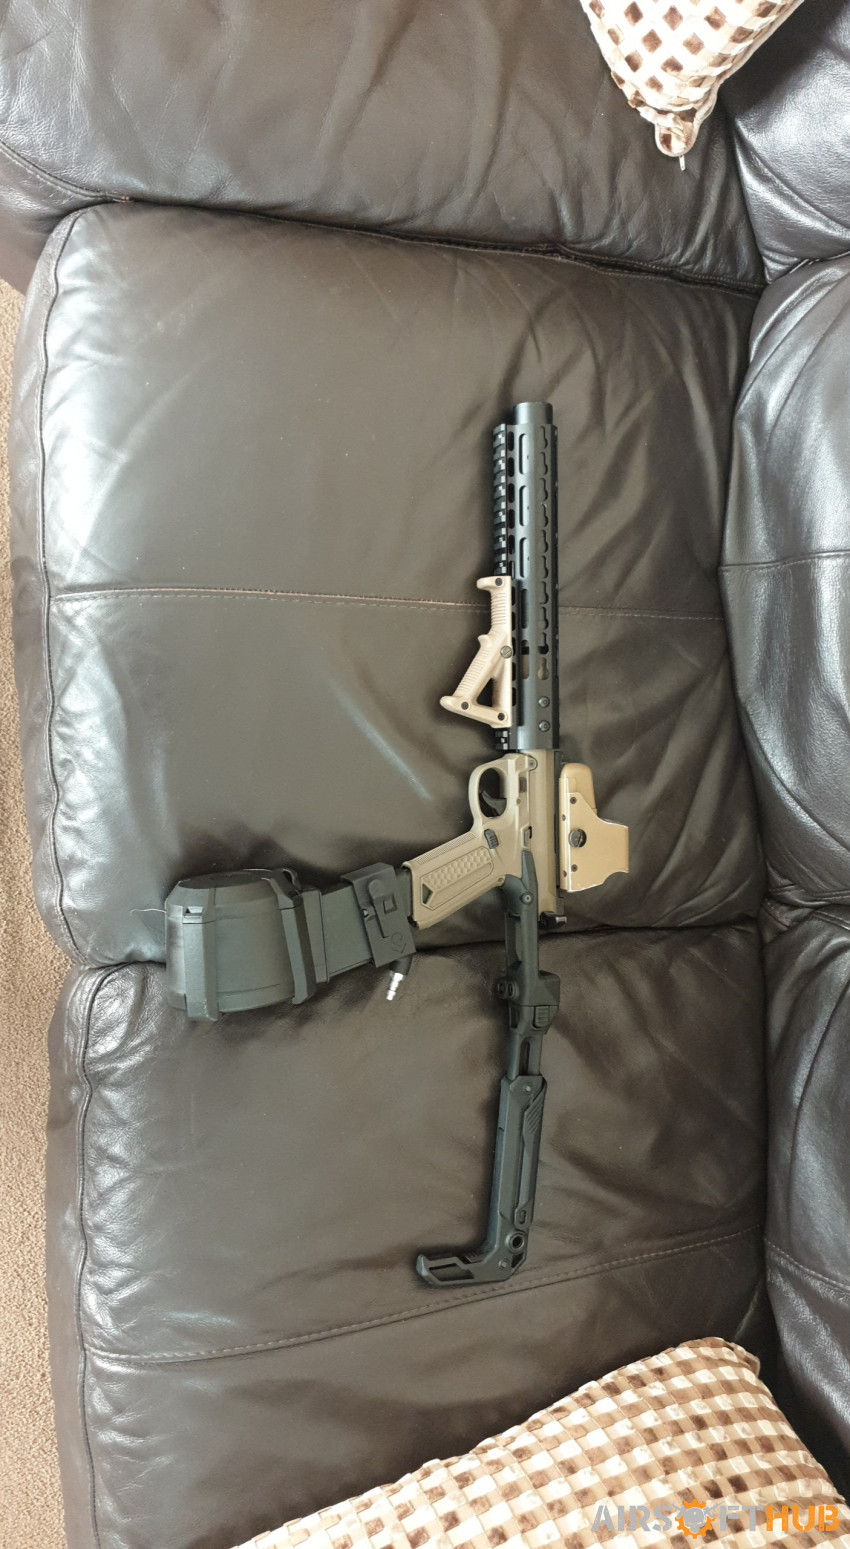 Aap01 upgrades - Used airsoft equipment